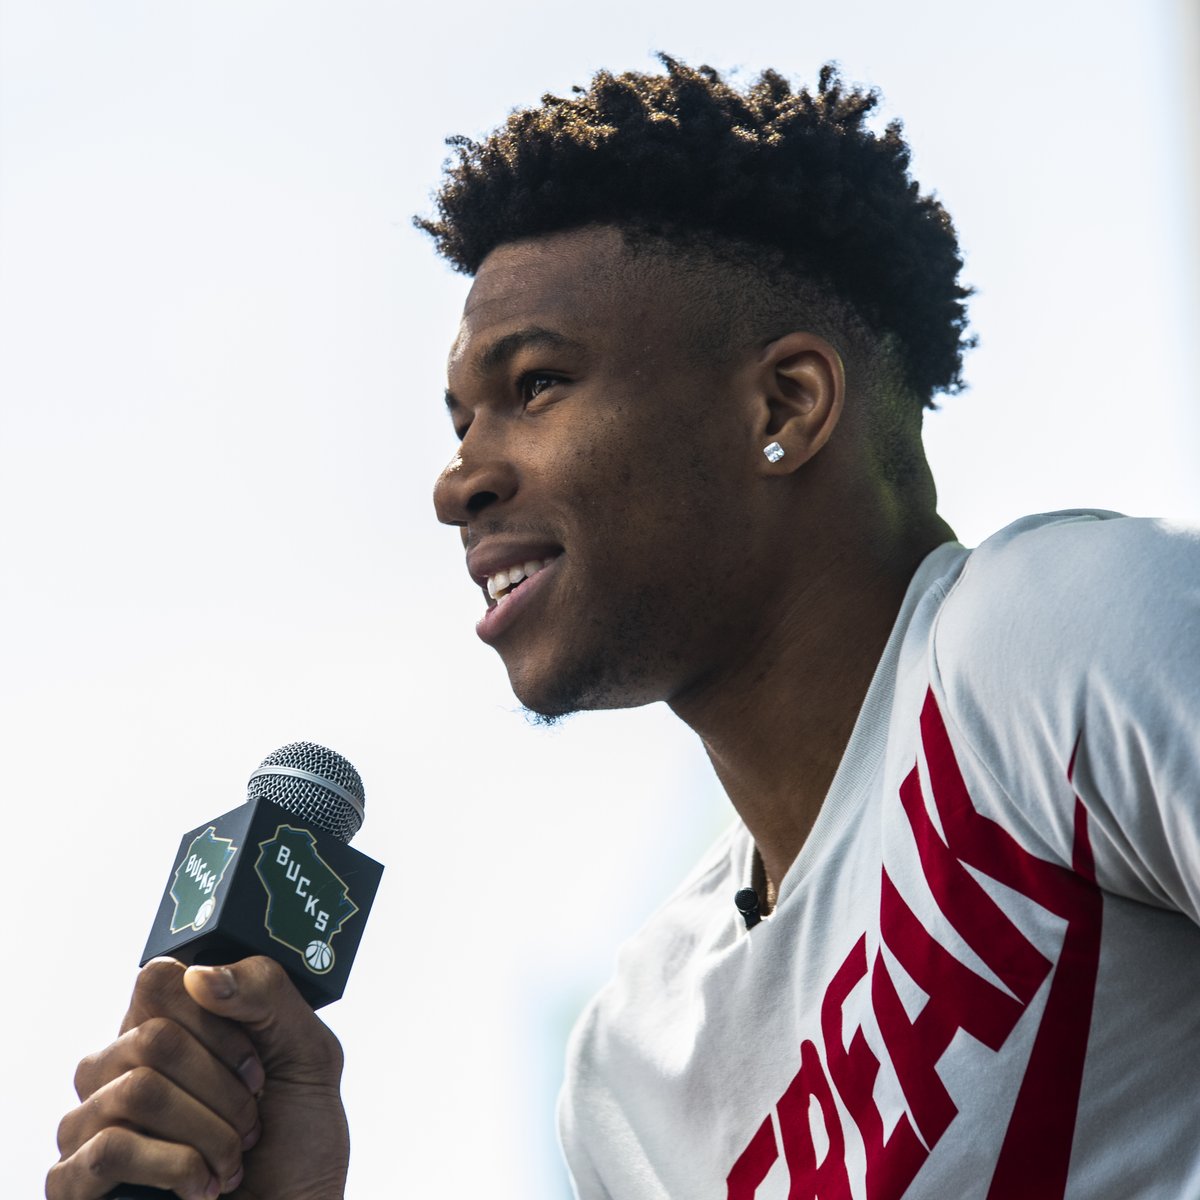 Giannis Antetokounmpo and his brothers are opening Milwaukee shop